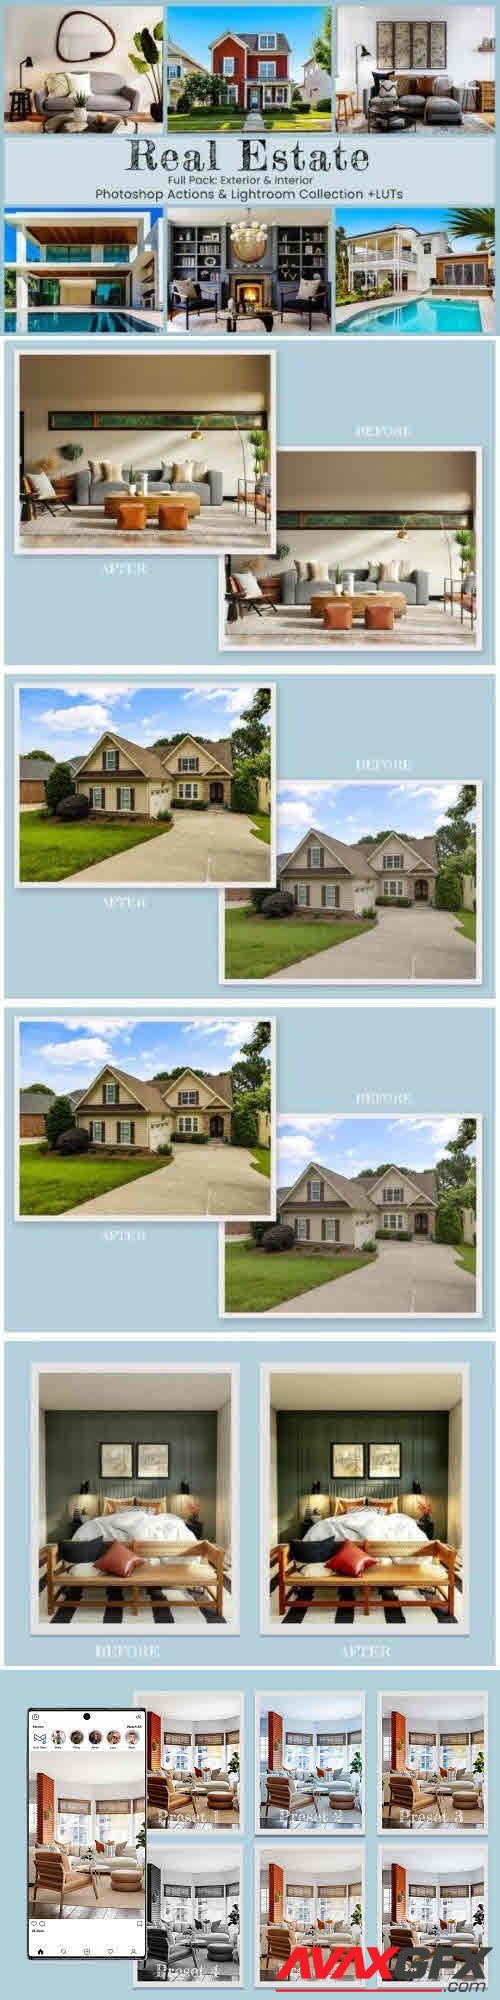 42 Real Estate Photoshop actions LR - 12746635